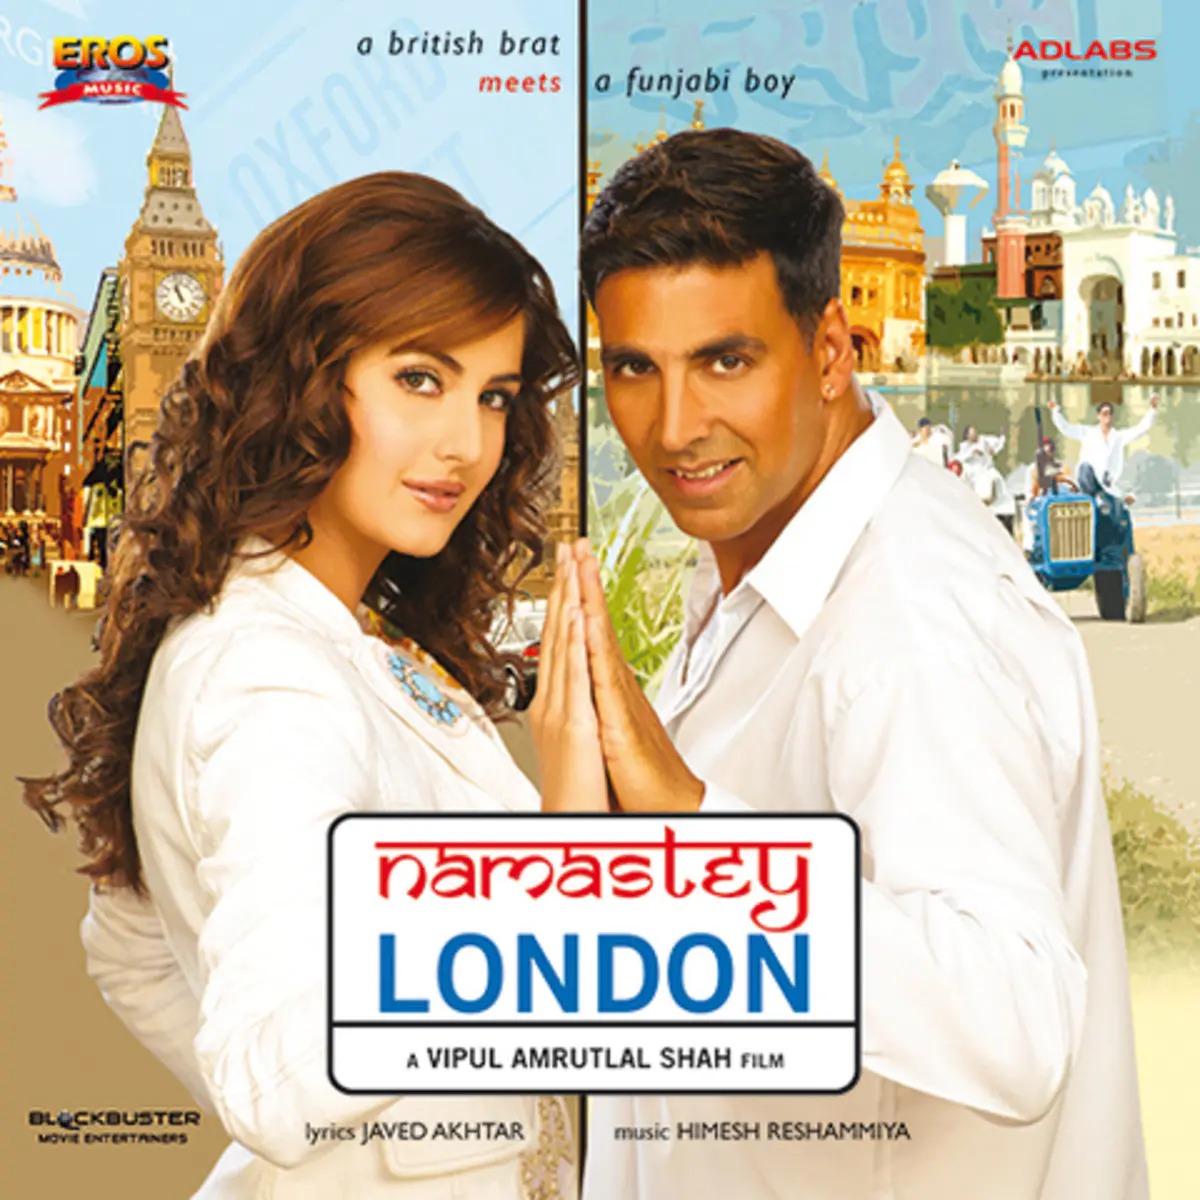 Vipul Amrutlal Shah recollects the India Sri Lanka World cup match on release day as Namastey London completes 14 years